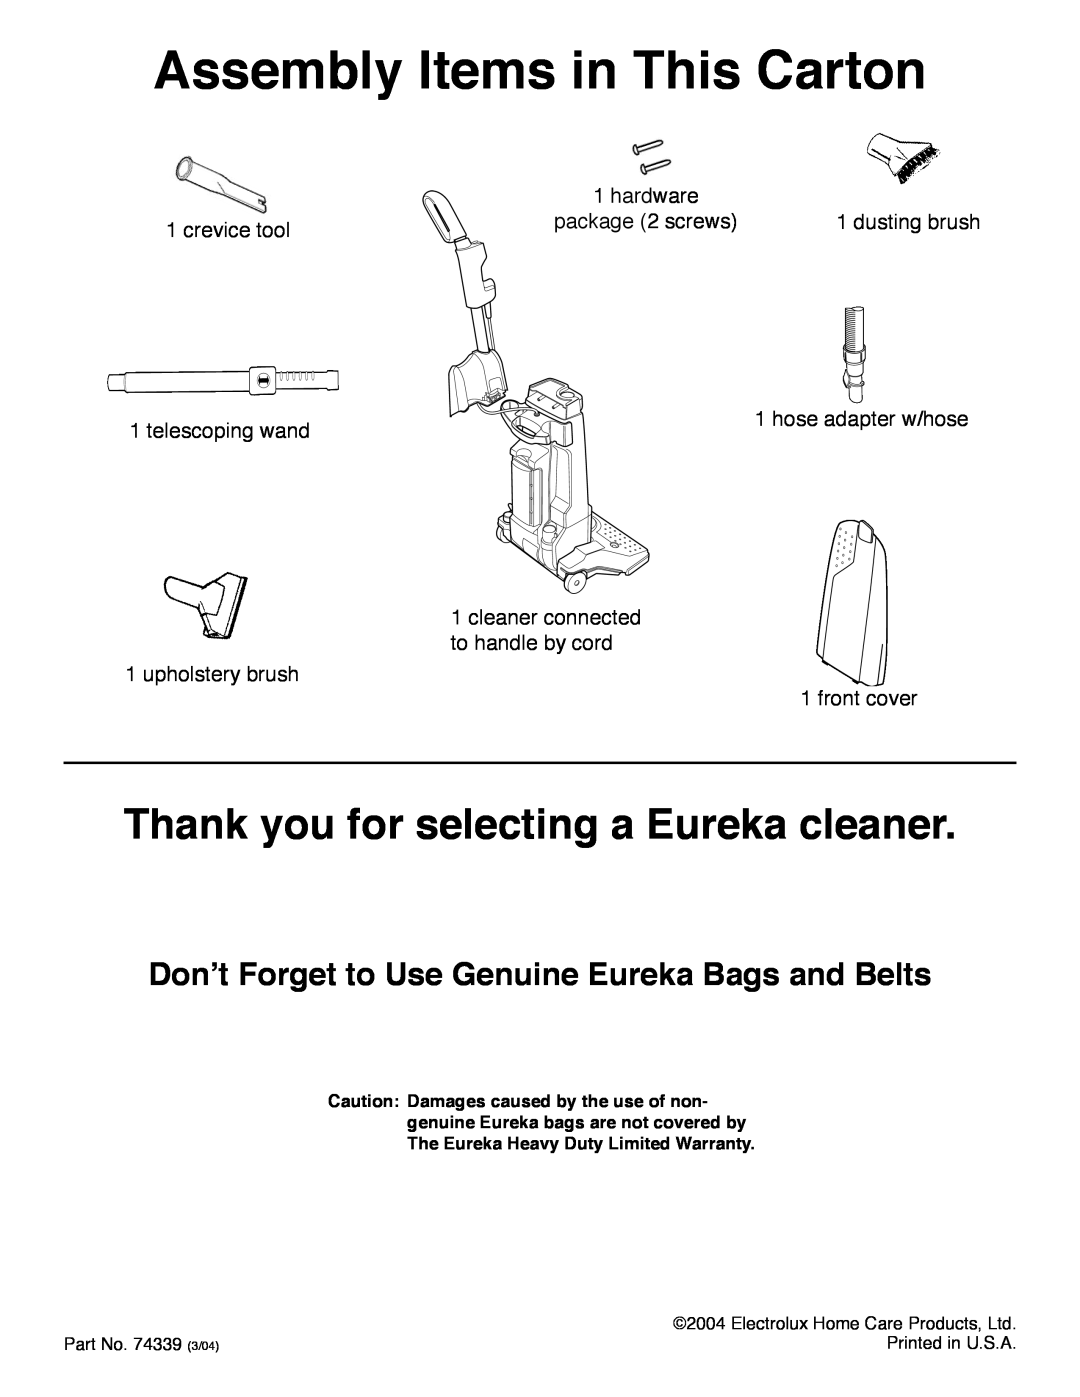 Eureka HD4570 warranty Assembly Items in This Carton, Thank you for selecting a Eureka cleaner, crevice tool, dusting brush 